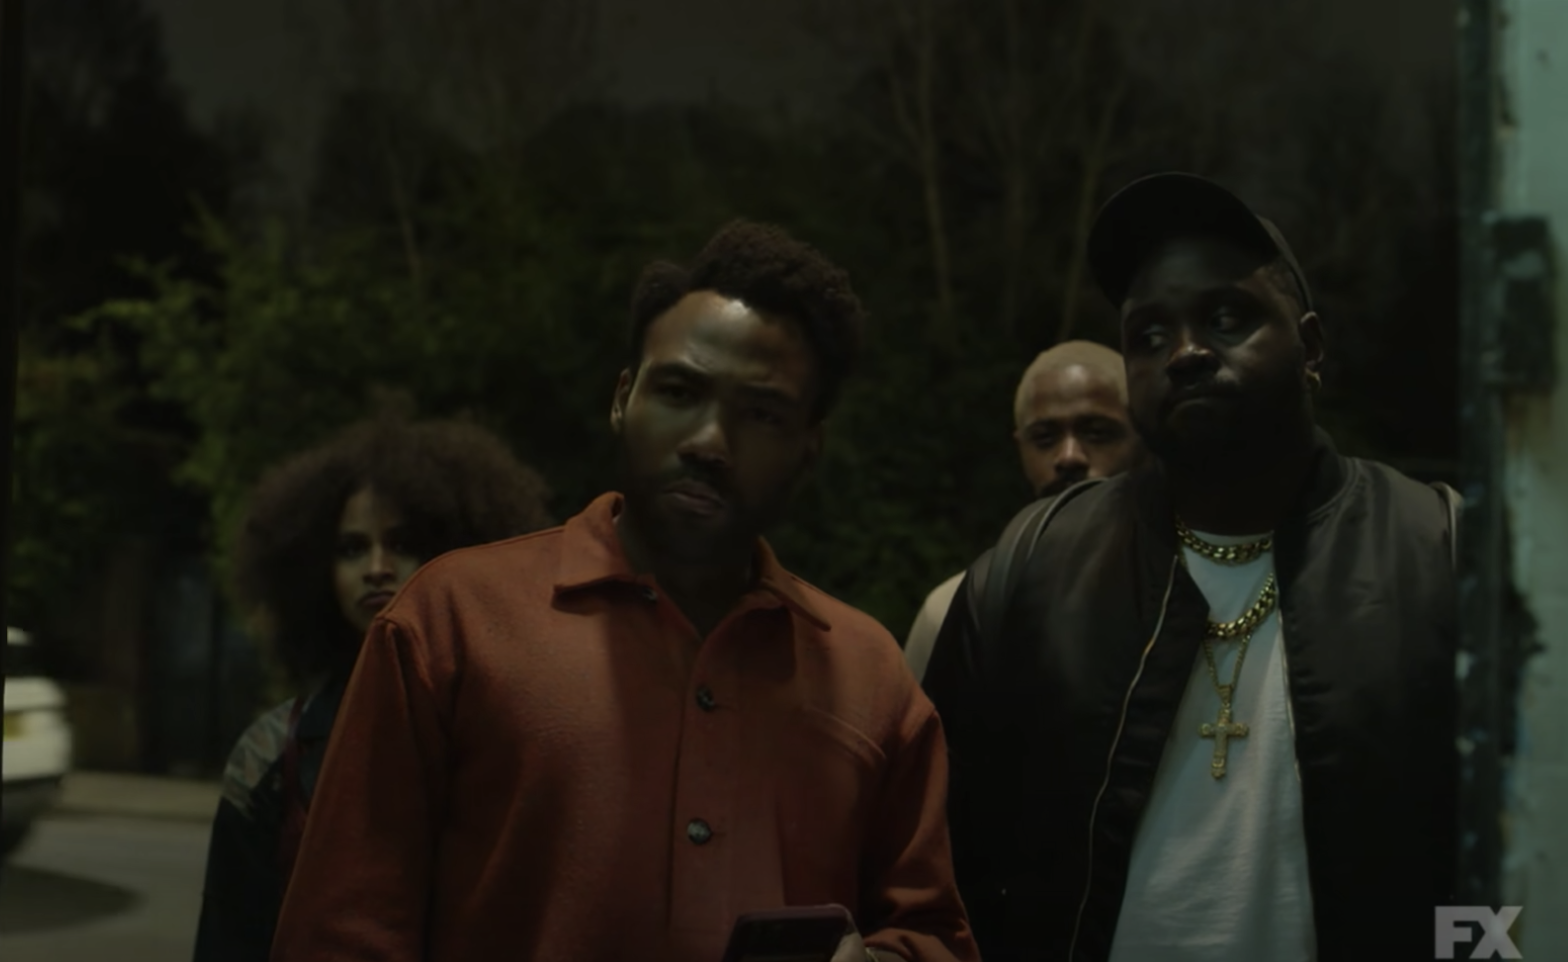 The First Trailer For Season 3 of 'Atlanta' Has Arrived